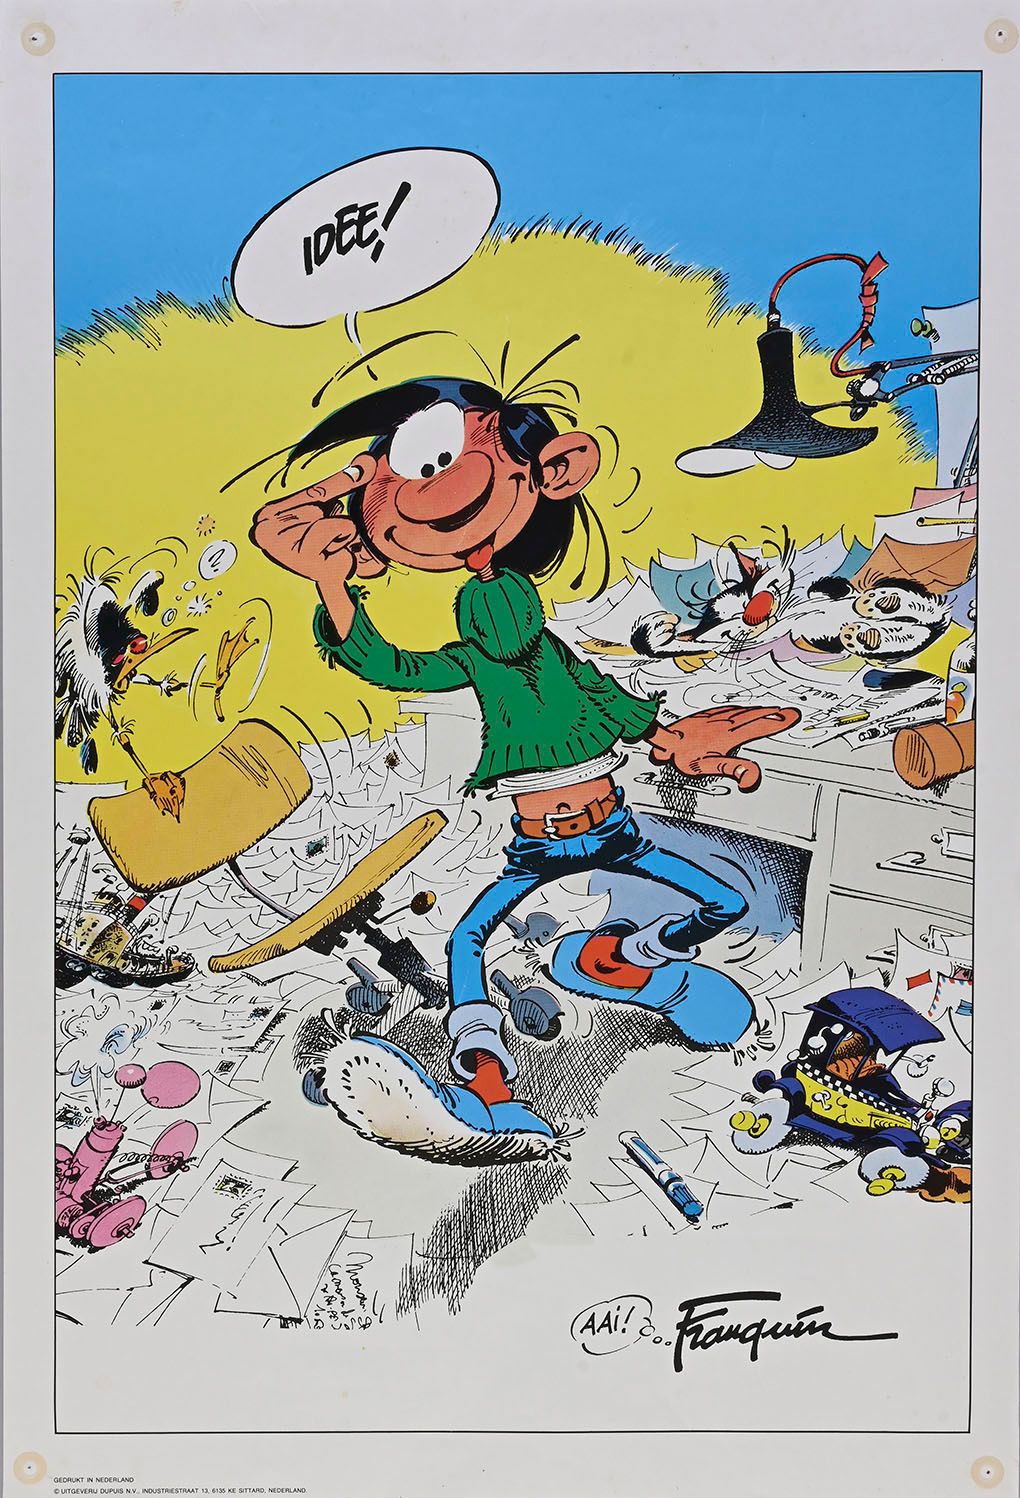 FRANQUIN SET OF 6 POSTERS.
Gaston Lagaffe and Mademoiselle Jeanne on the beach (&hellip;